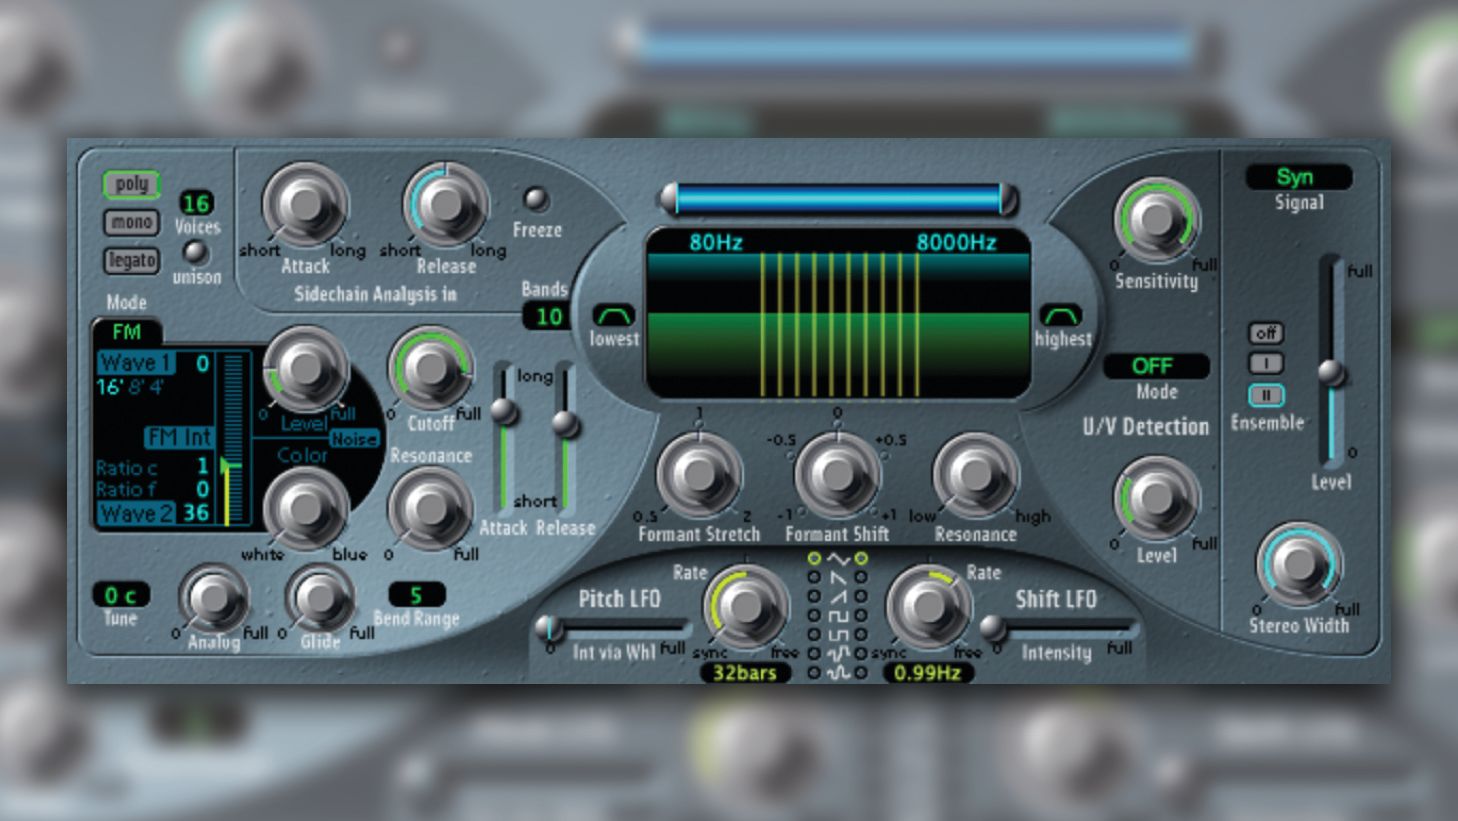 "Most DAWs include some form of vocoder plugin, so why not use what you already have?": How to use the vocoder in Logic Pro